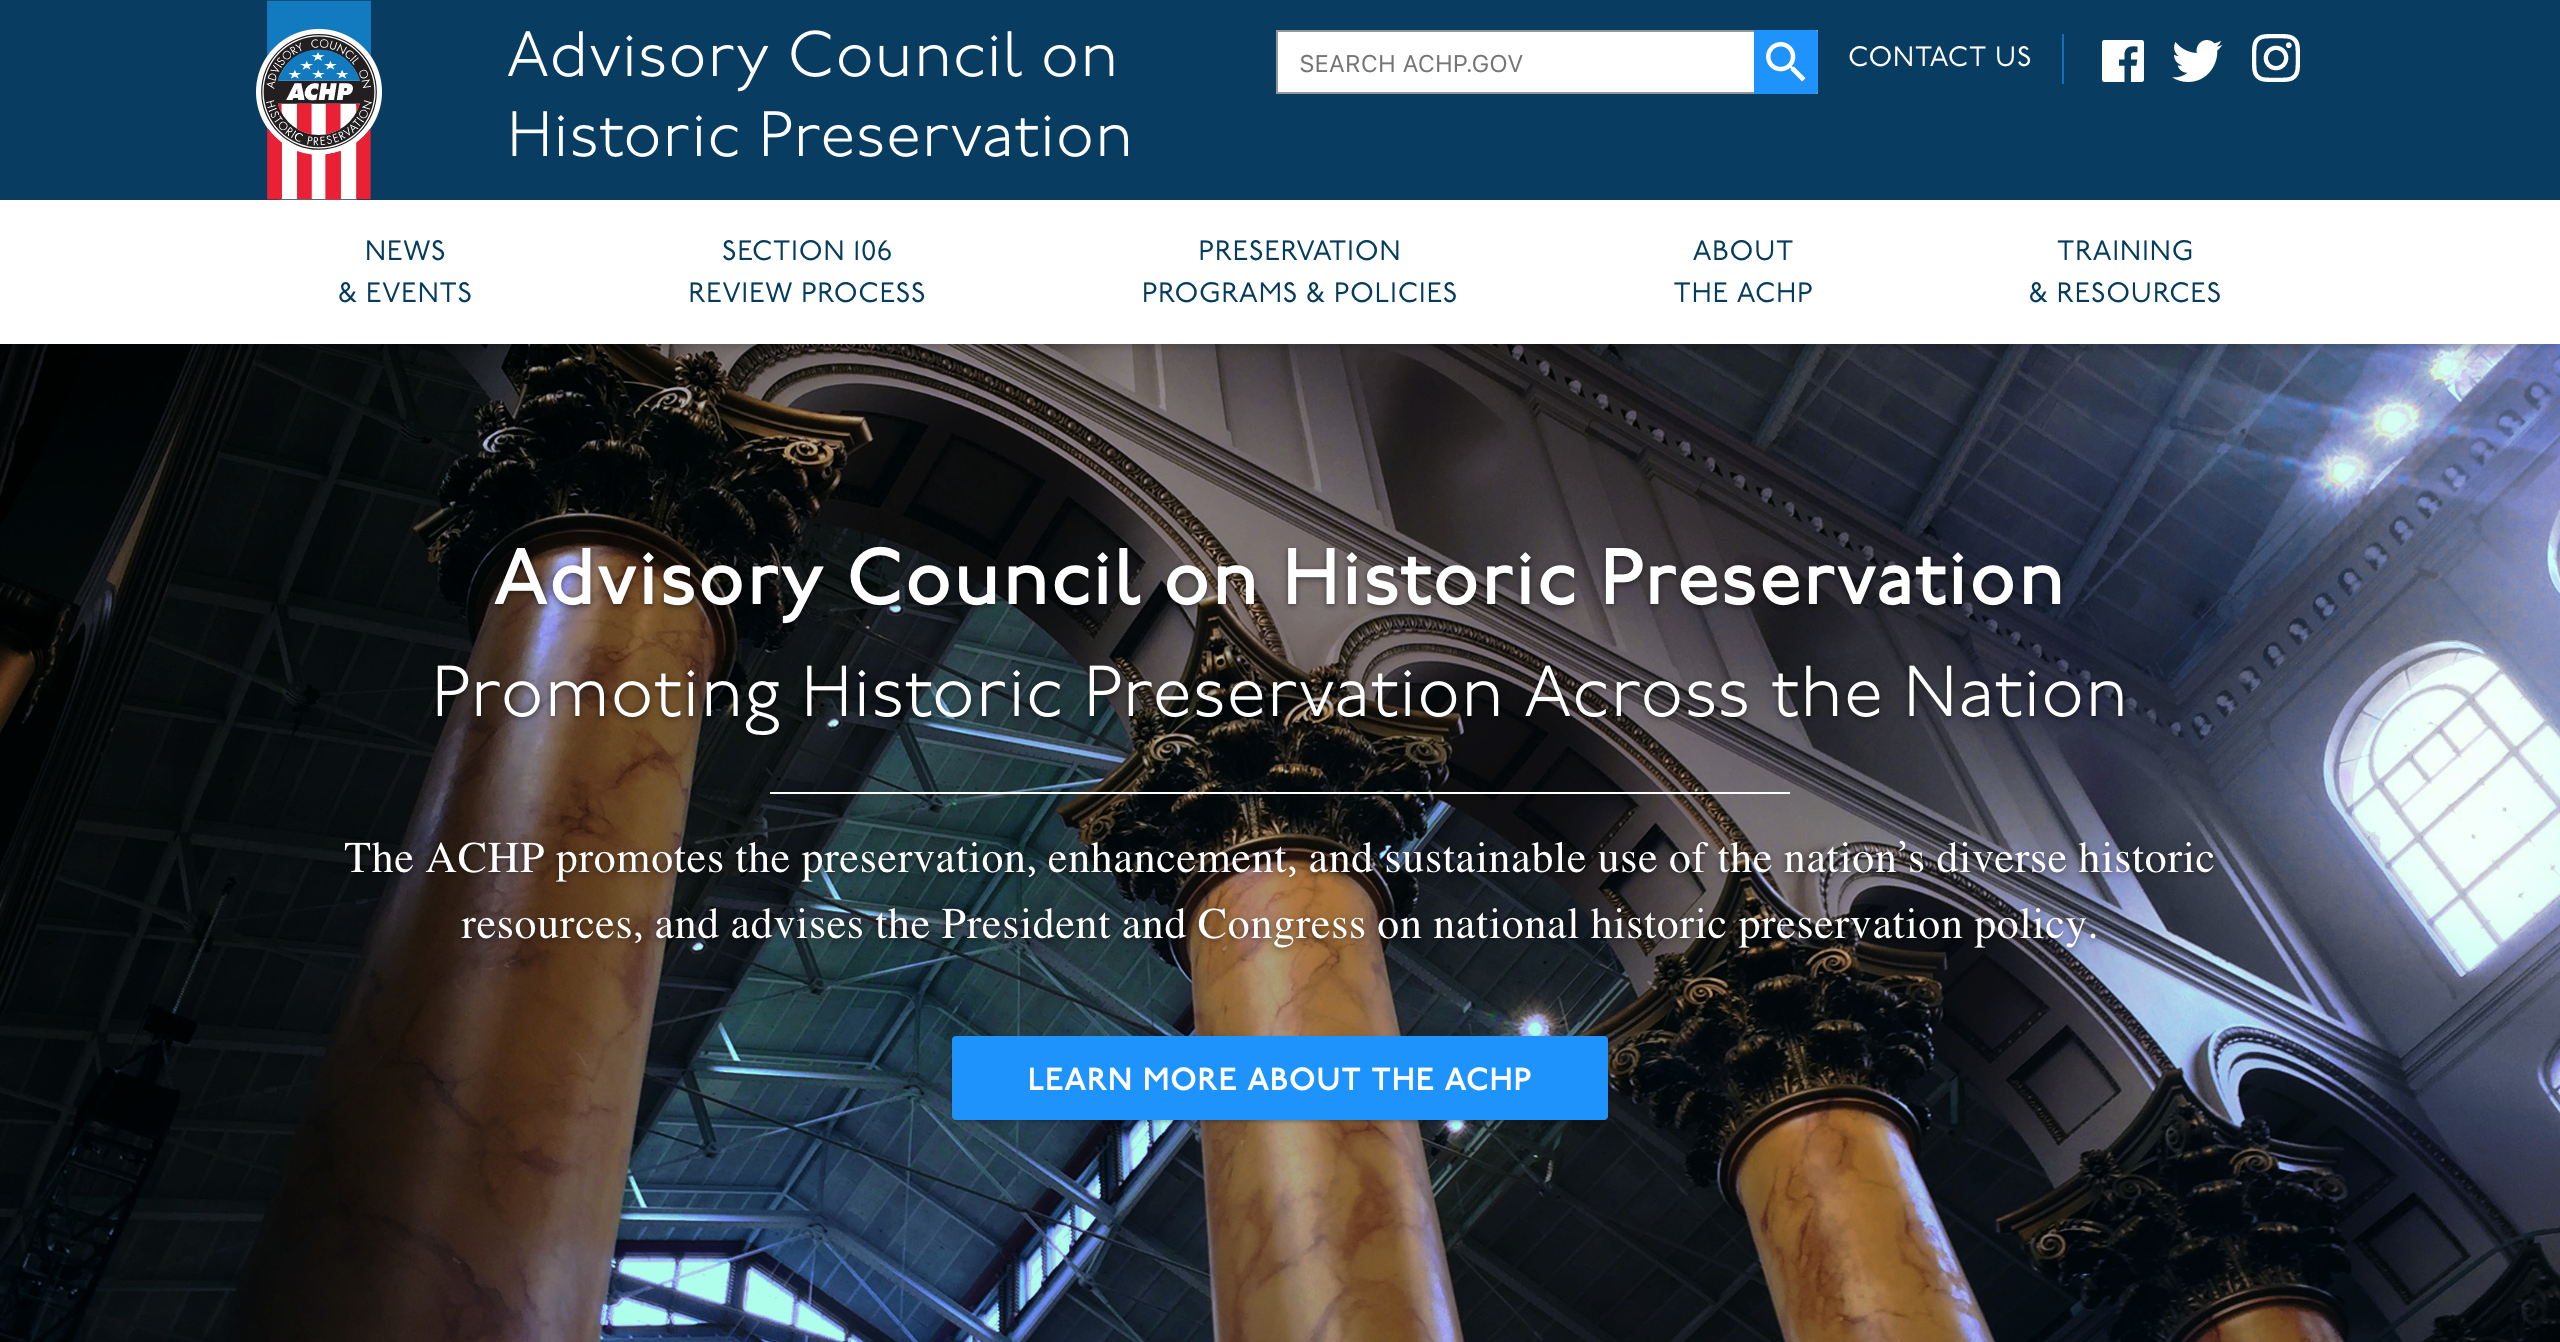 Advisory Council on Historic Preservation website